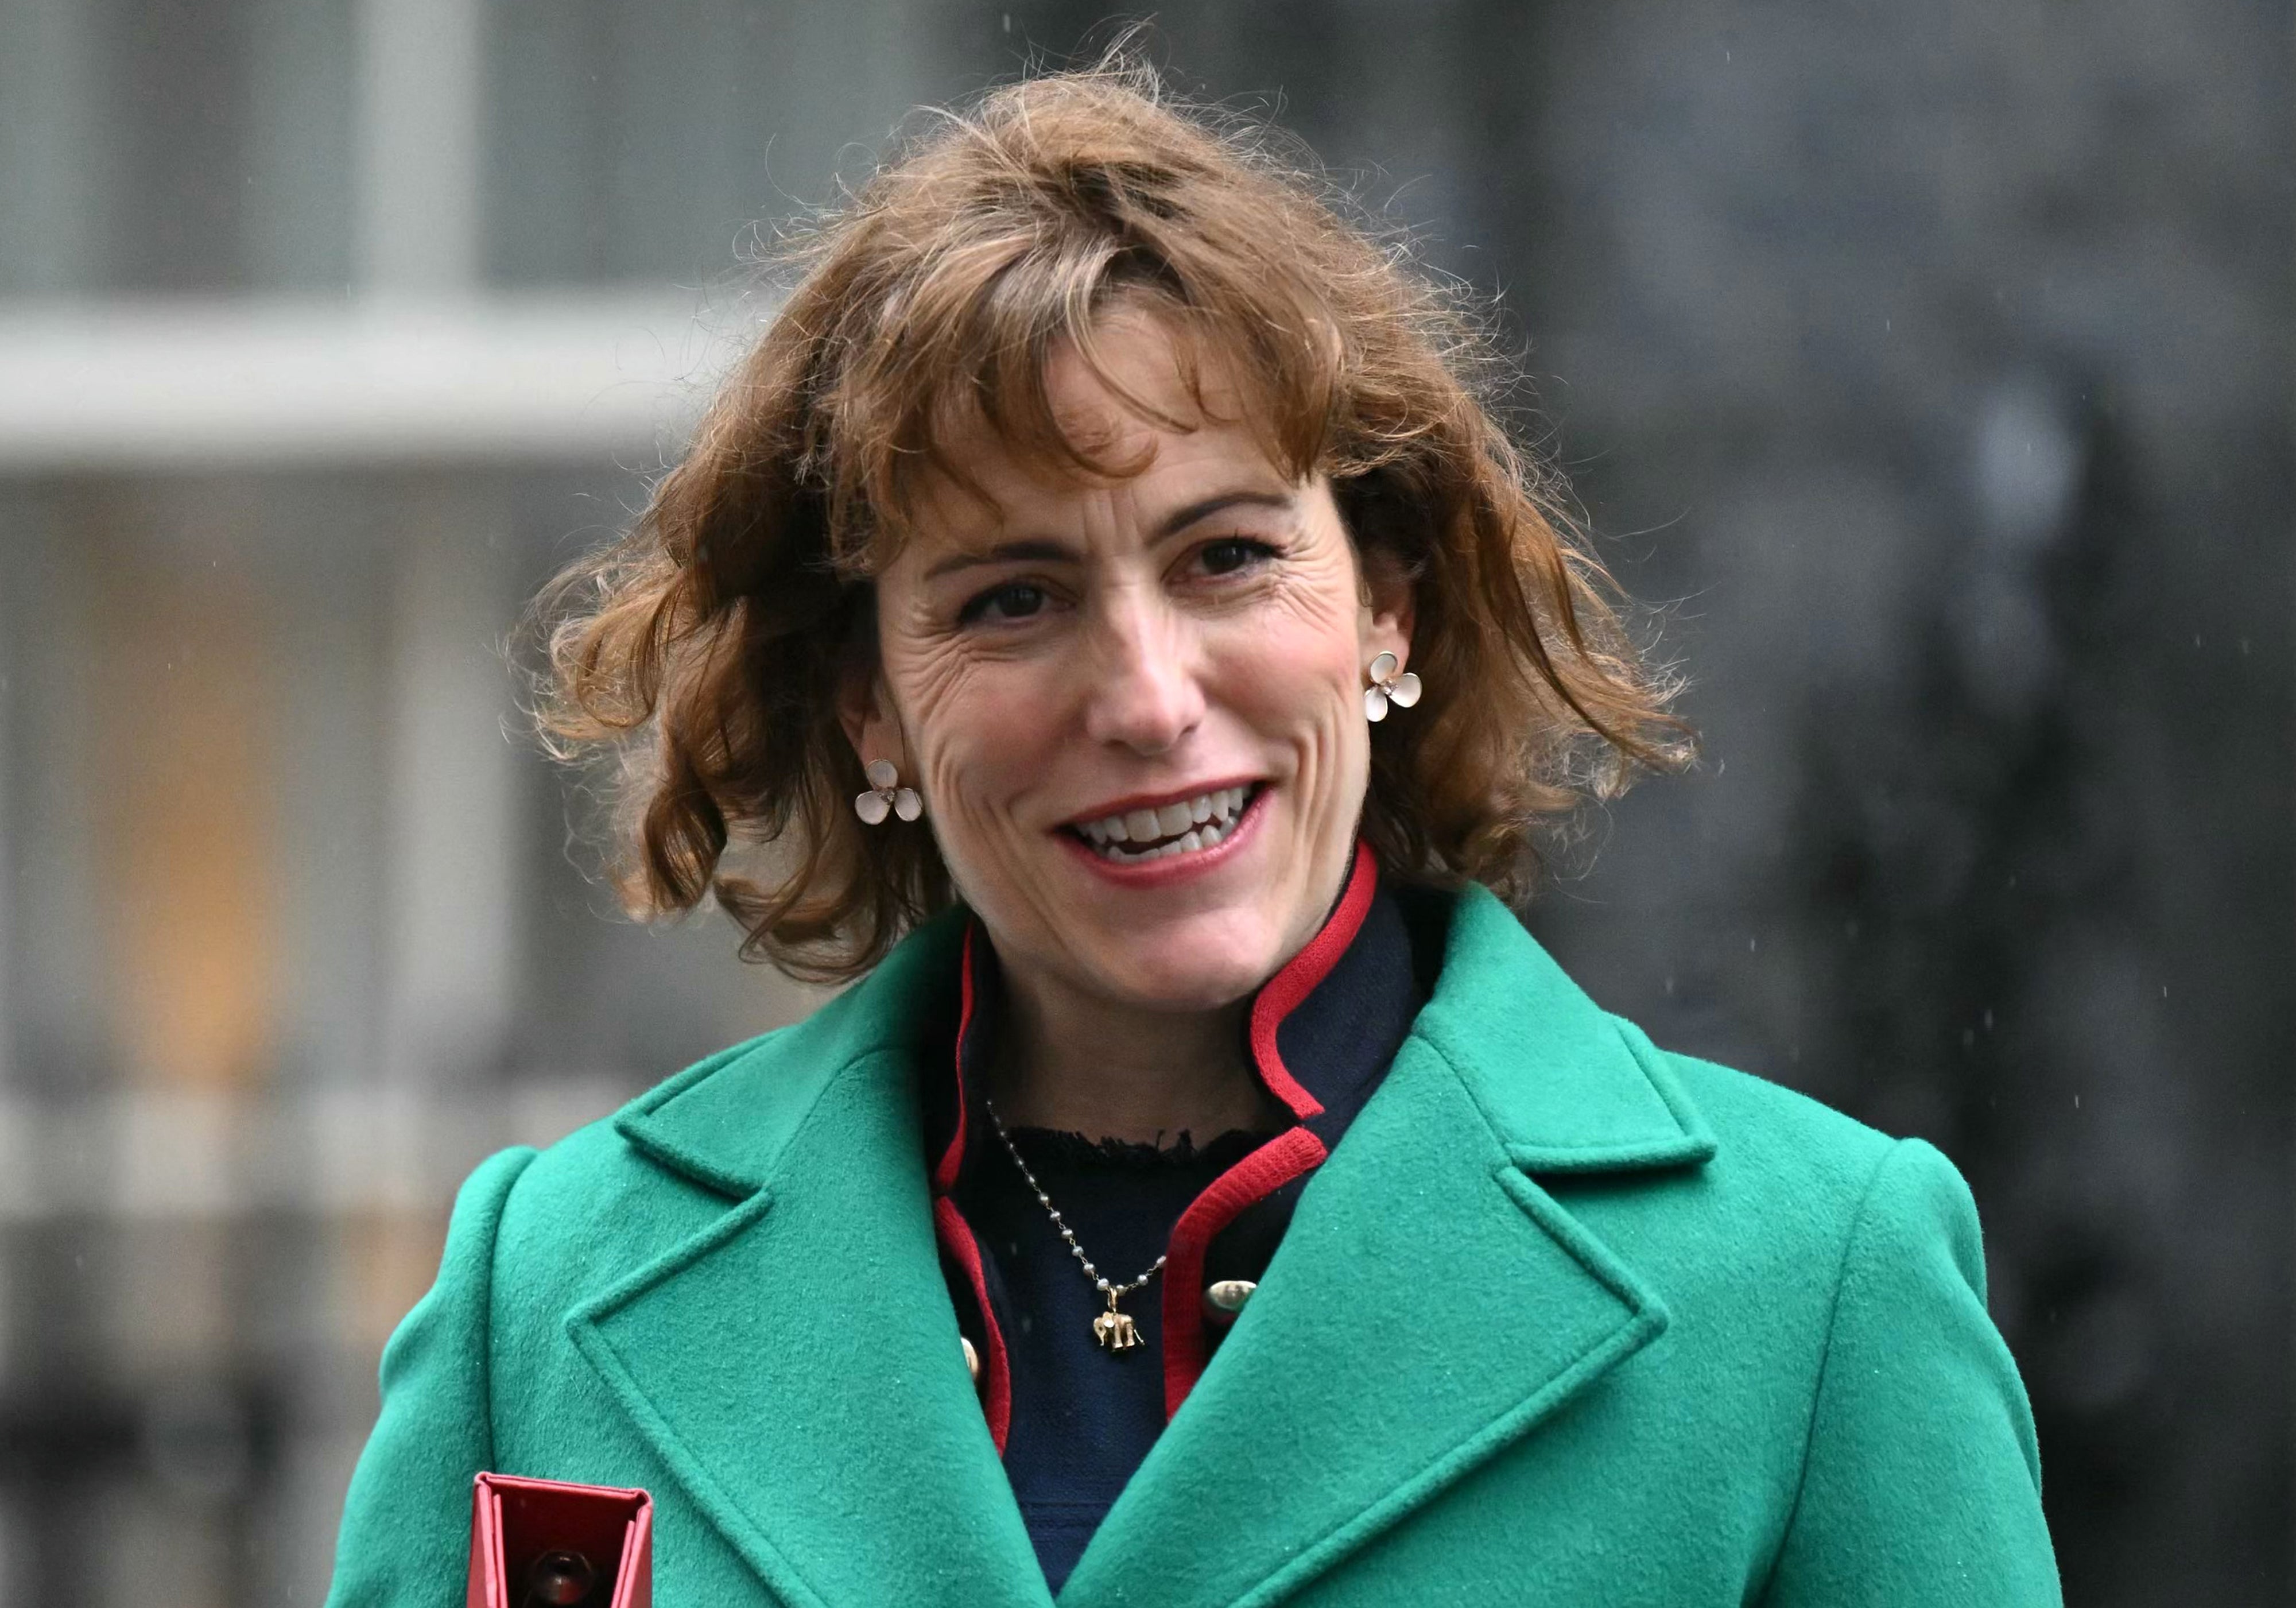 Thousands of doctors have signed a letter to Victoria Atkins